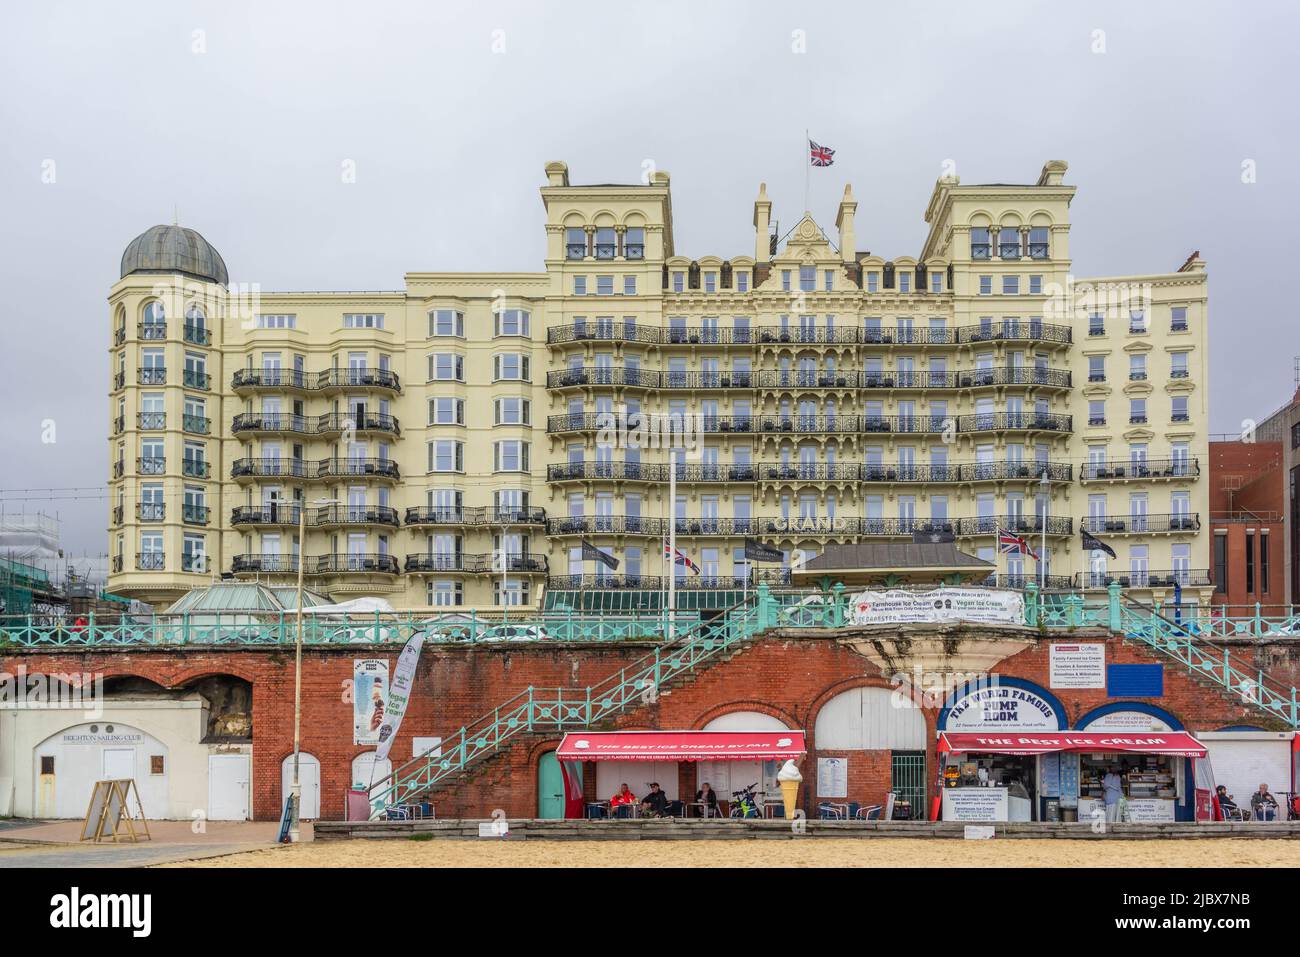 The Grand hotel, historic Victorian architecture along the seafront in Brighton, East Sussex, England, UK Stock Photo